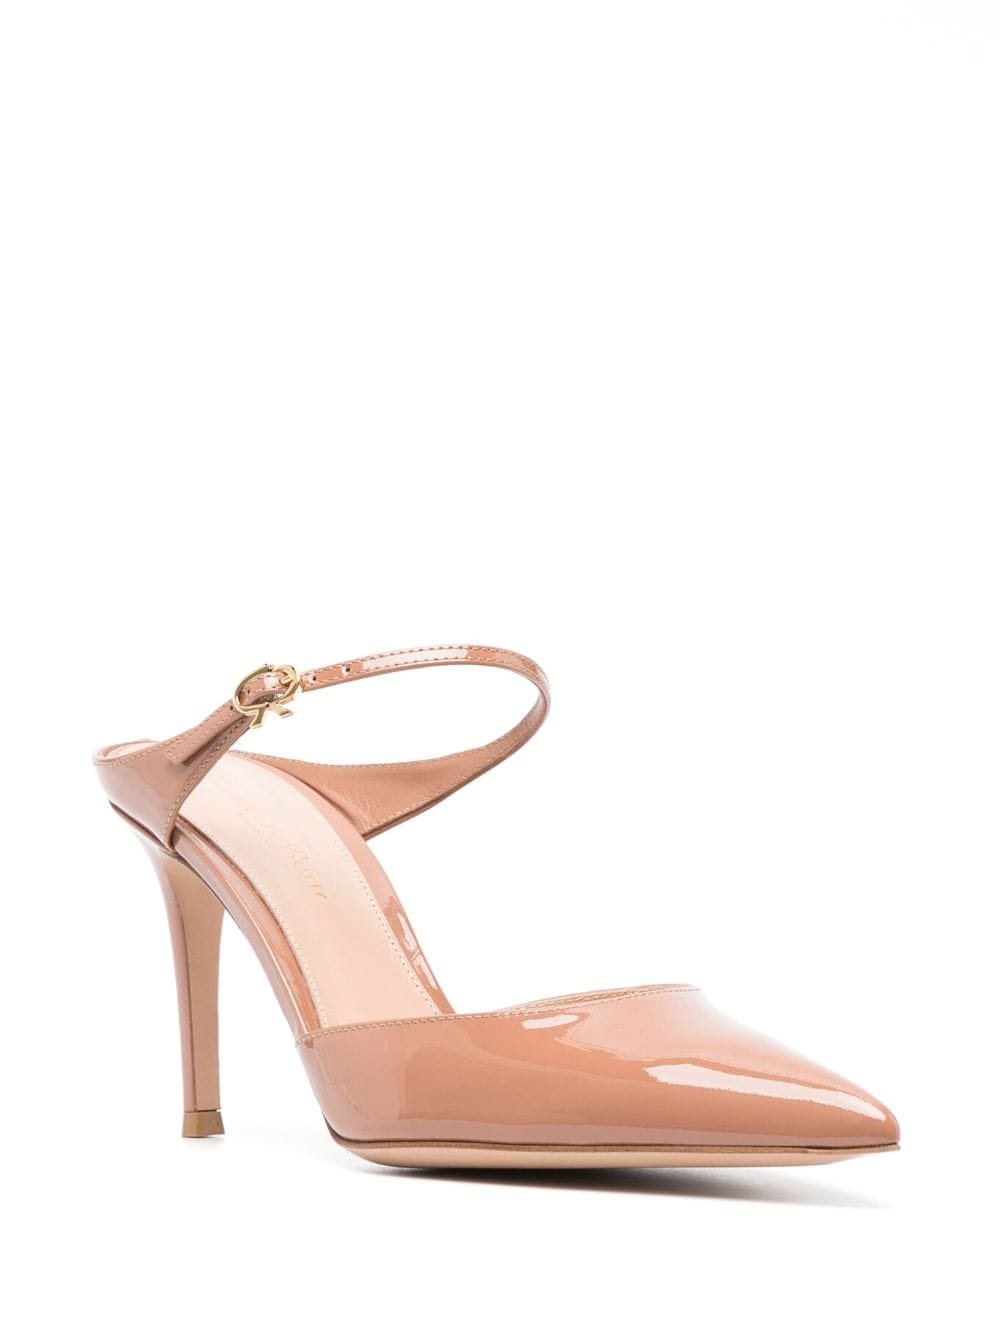 Gianvito Rossi Ribbon 85mm patent-leather mules - Beige